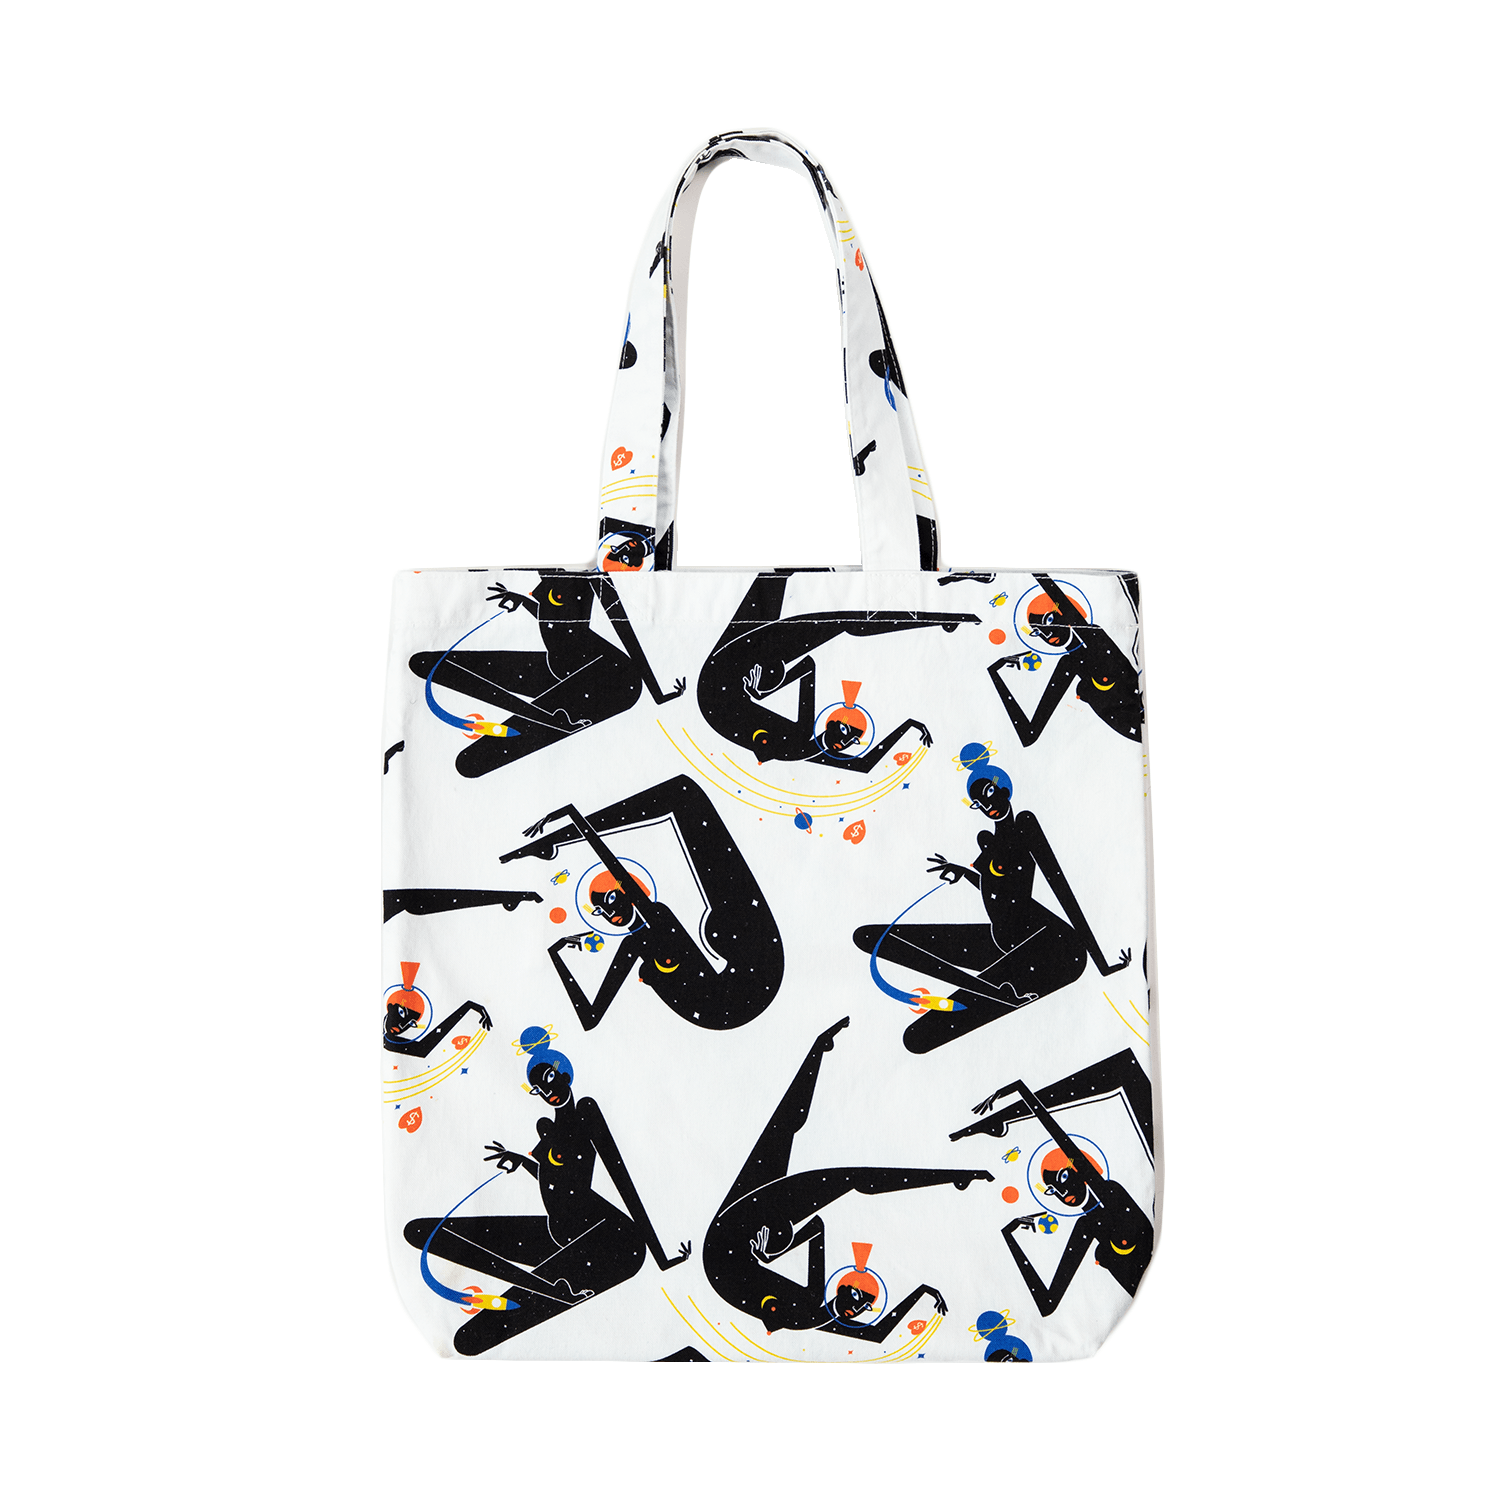 evelyn tote